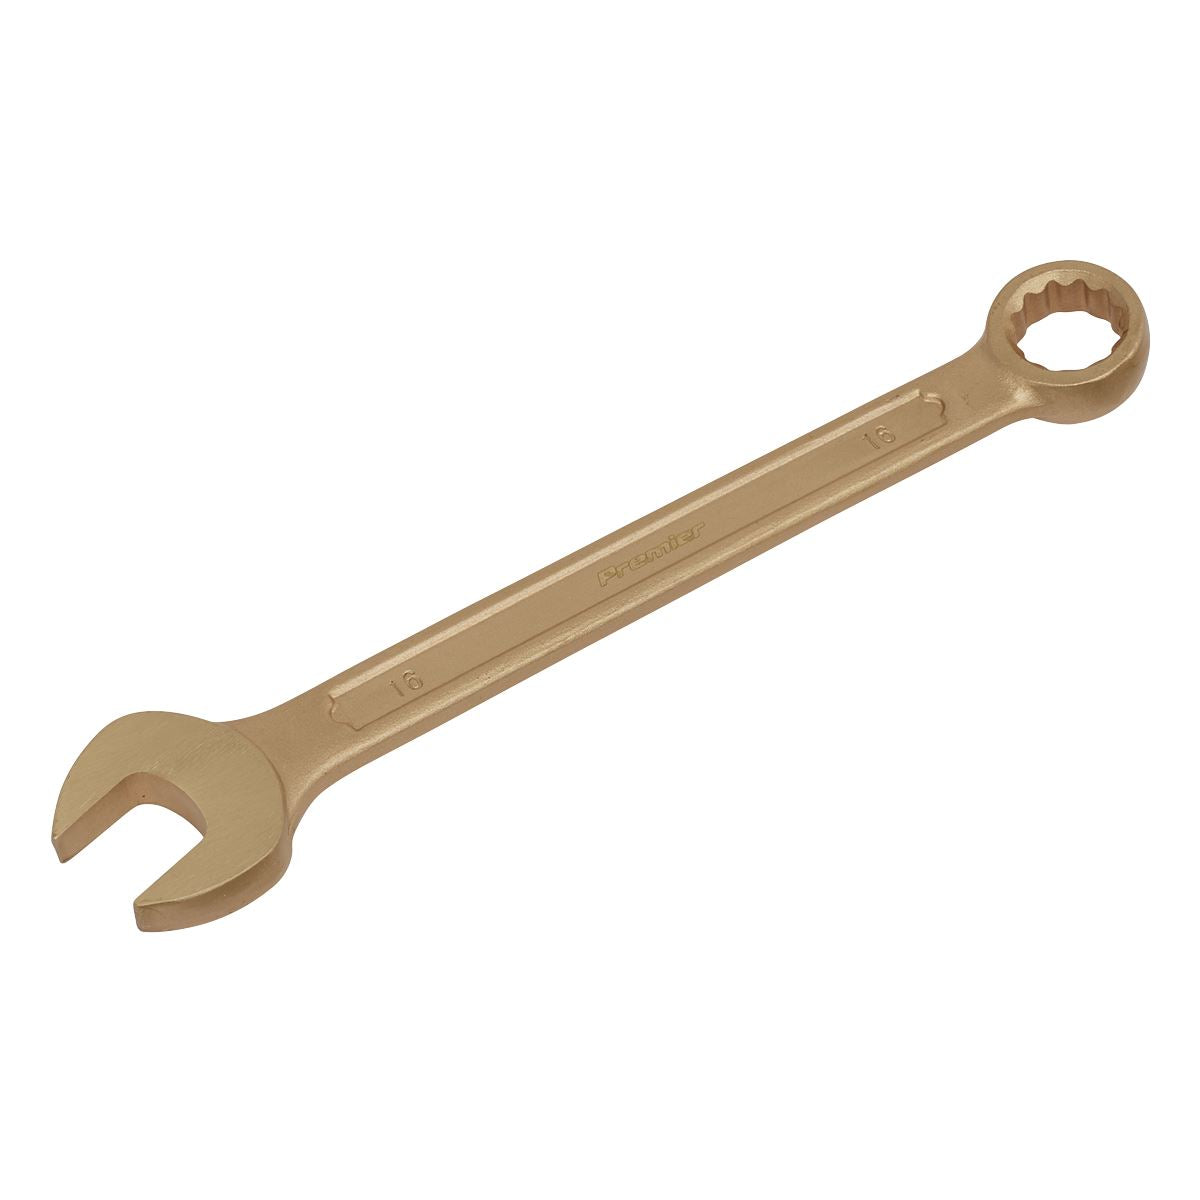 Sealey Premier Combination Spanner 16mm - Non-Sparking